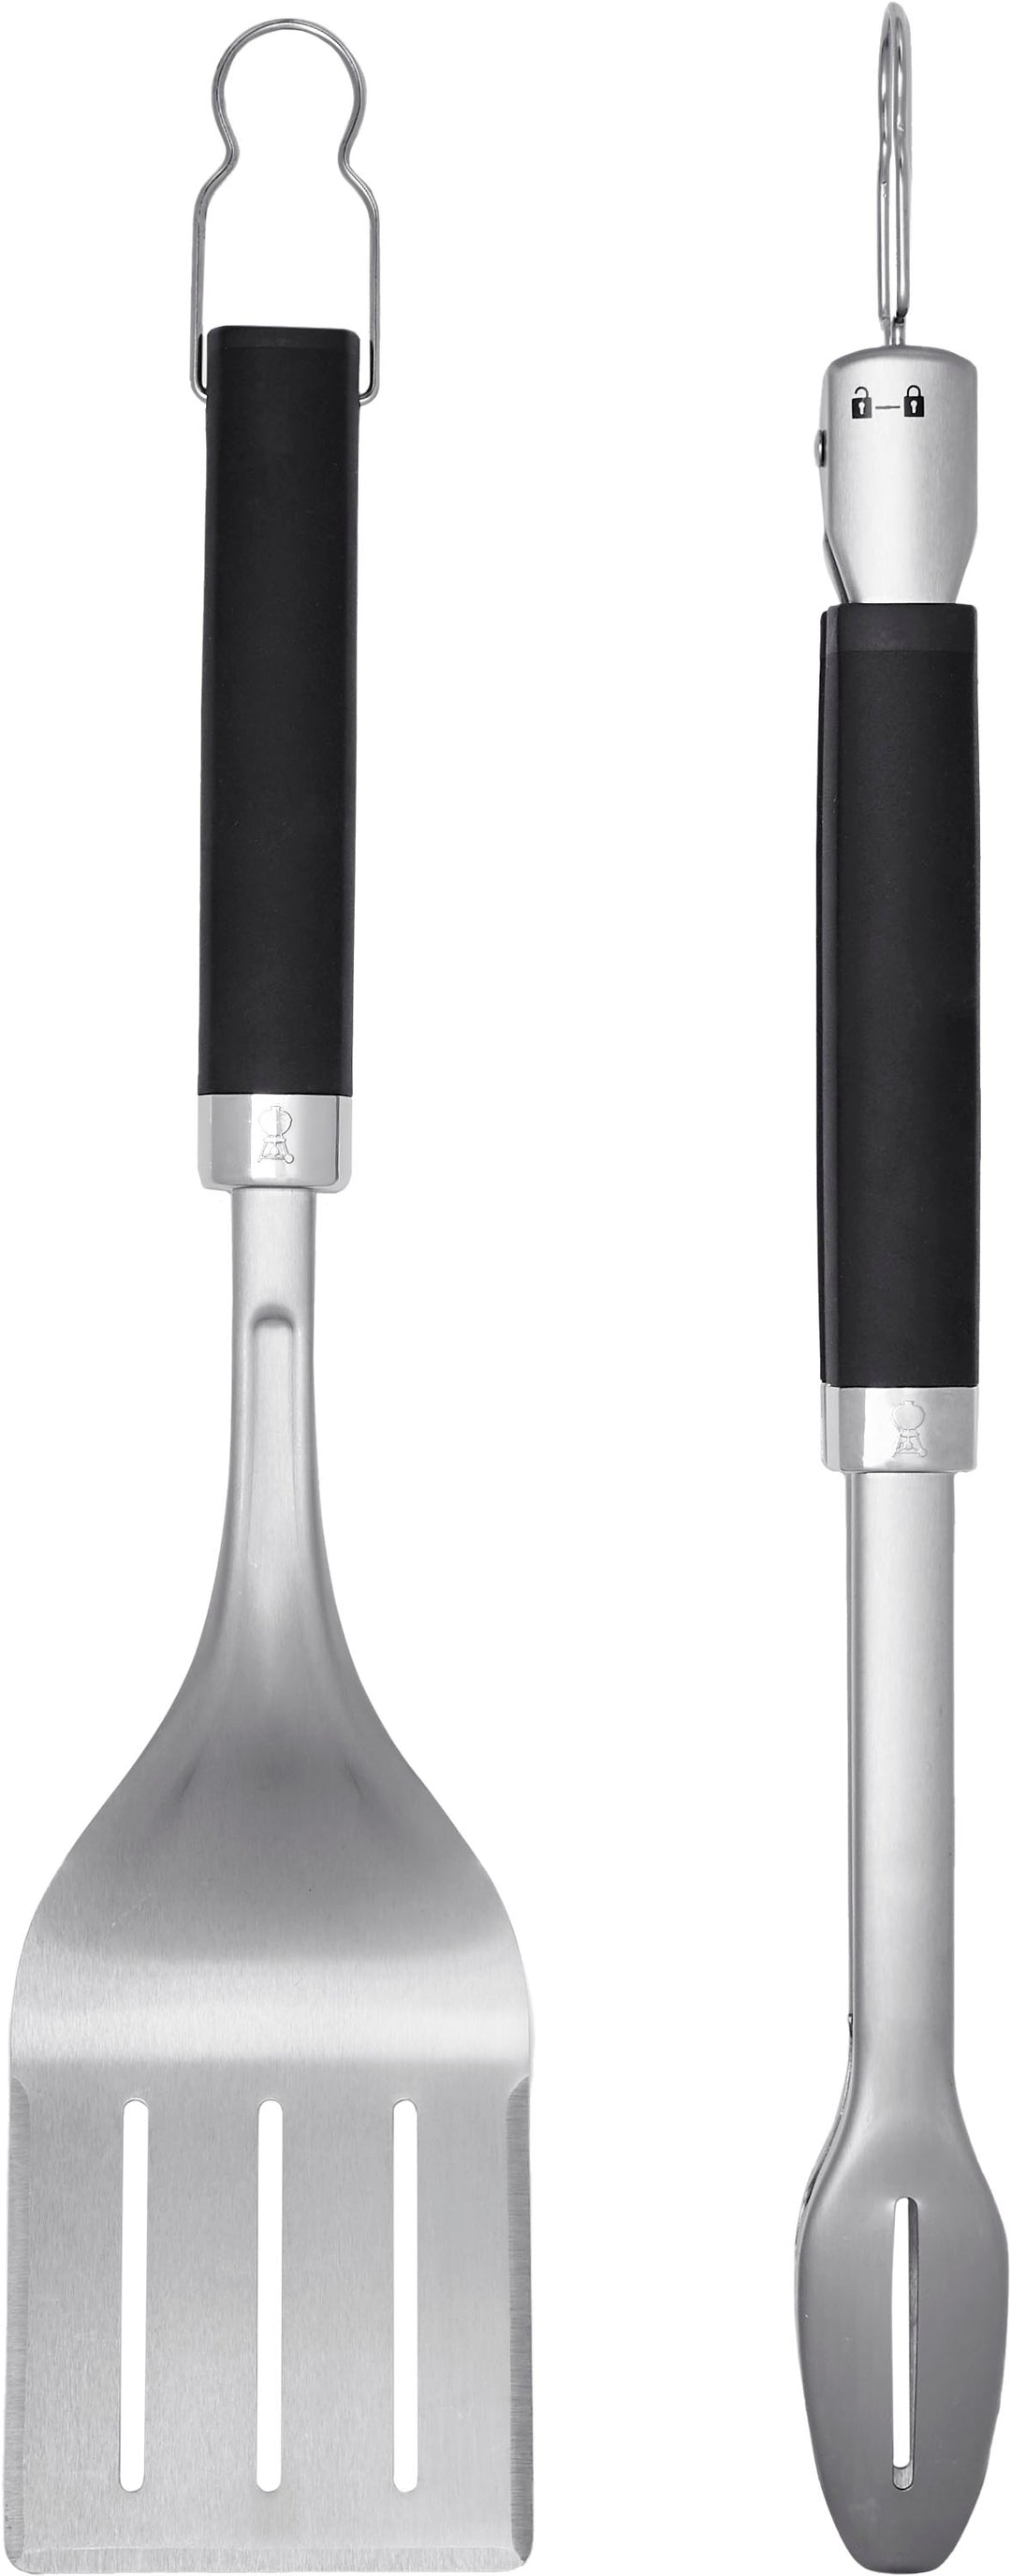 Weber - Precision Grill Tongs and Spatula Set - Black_7